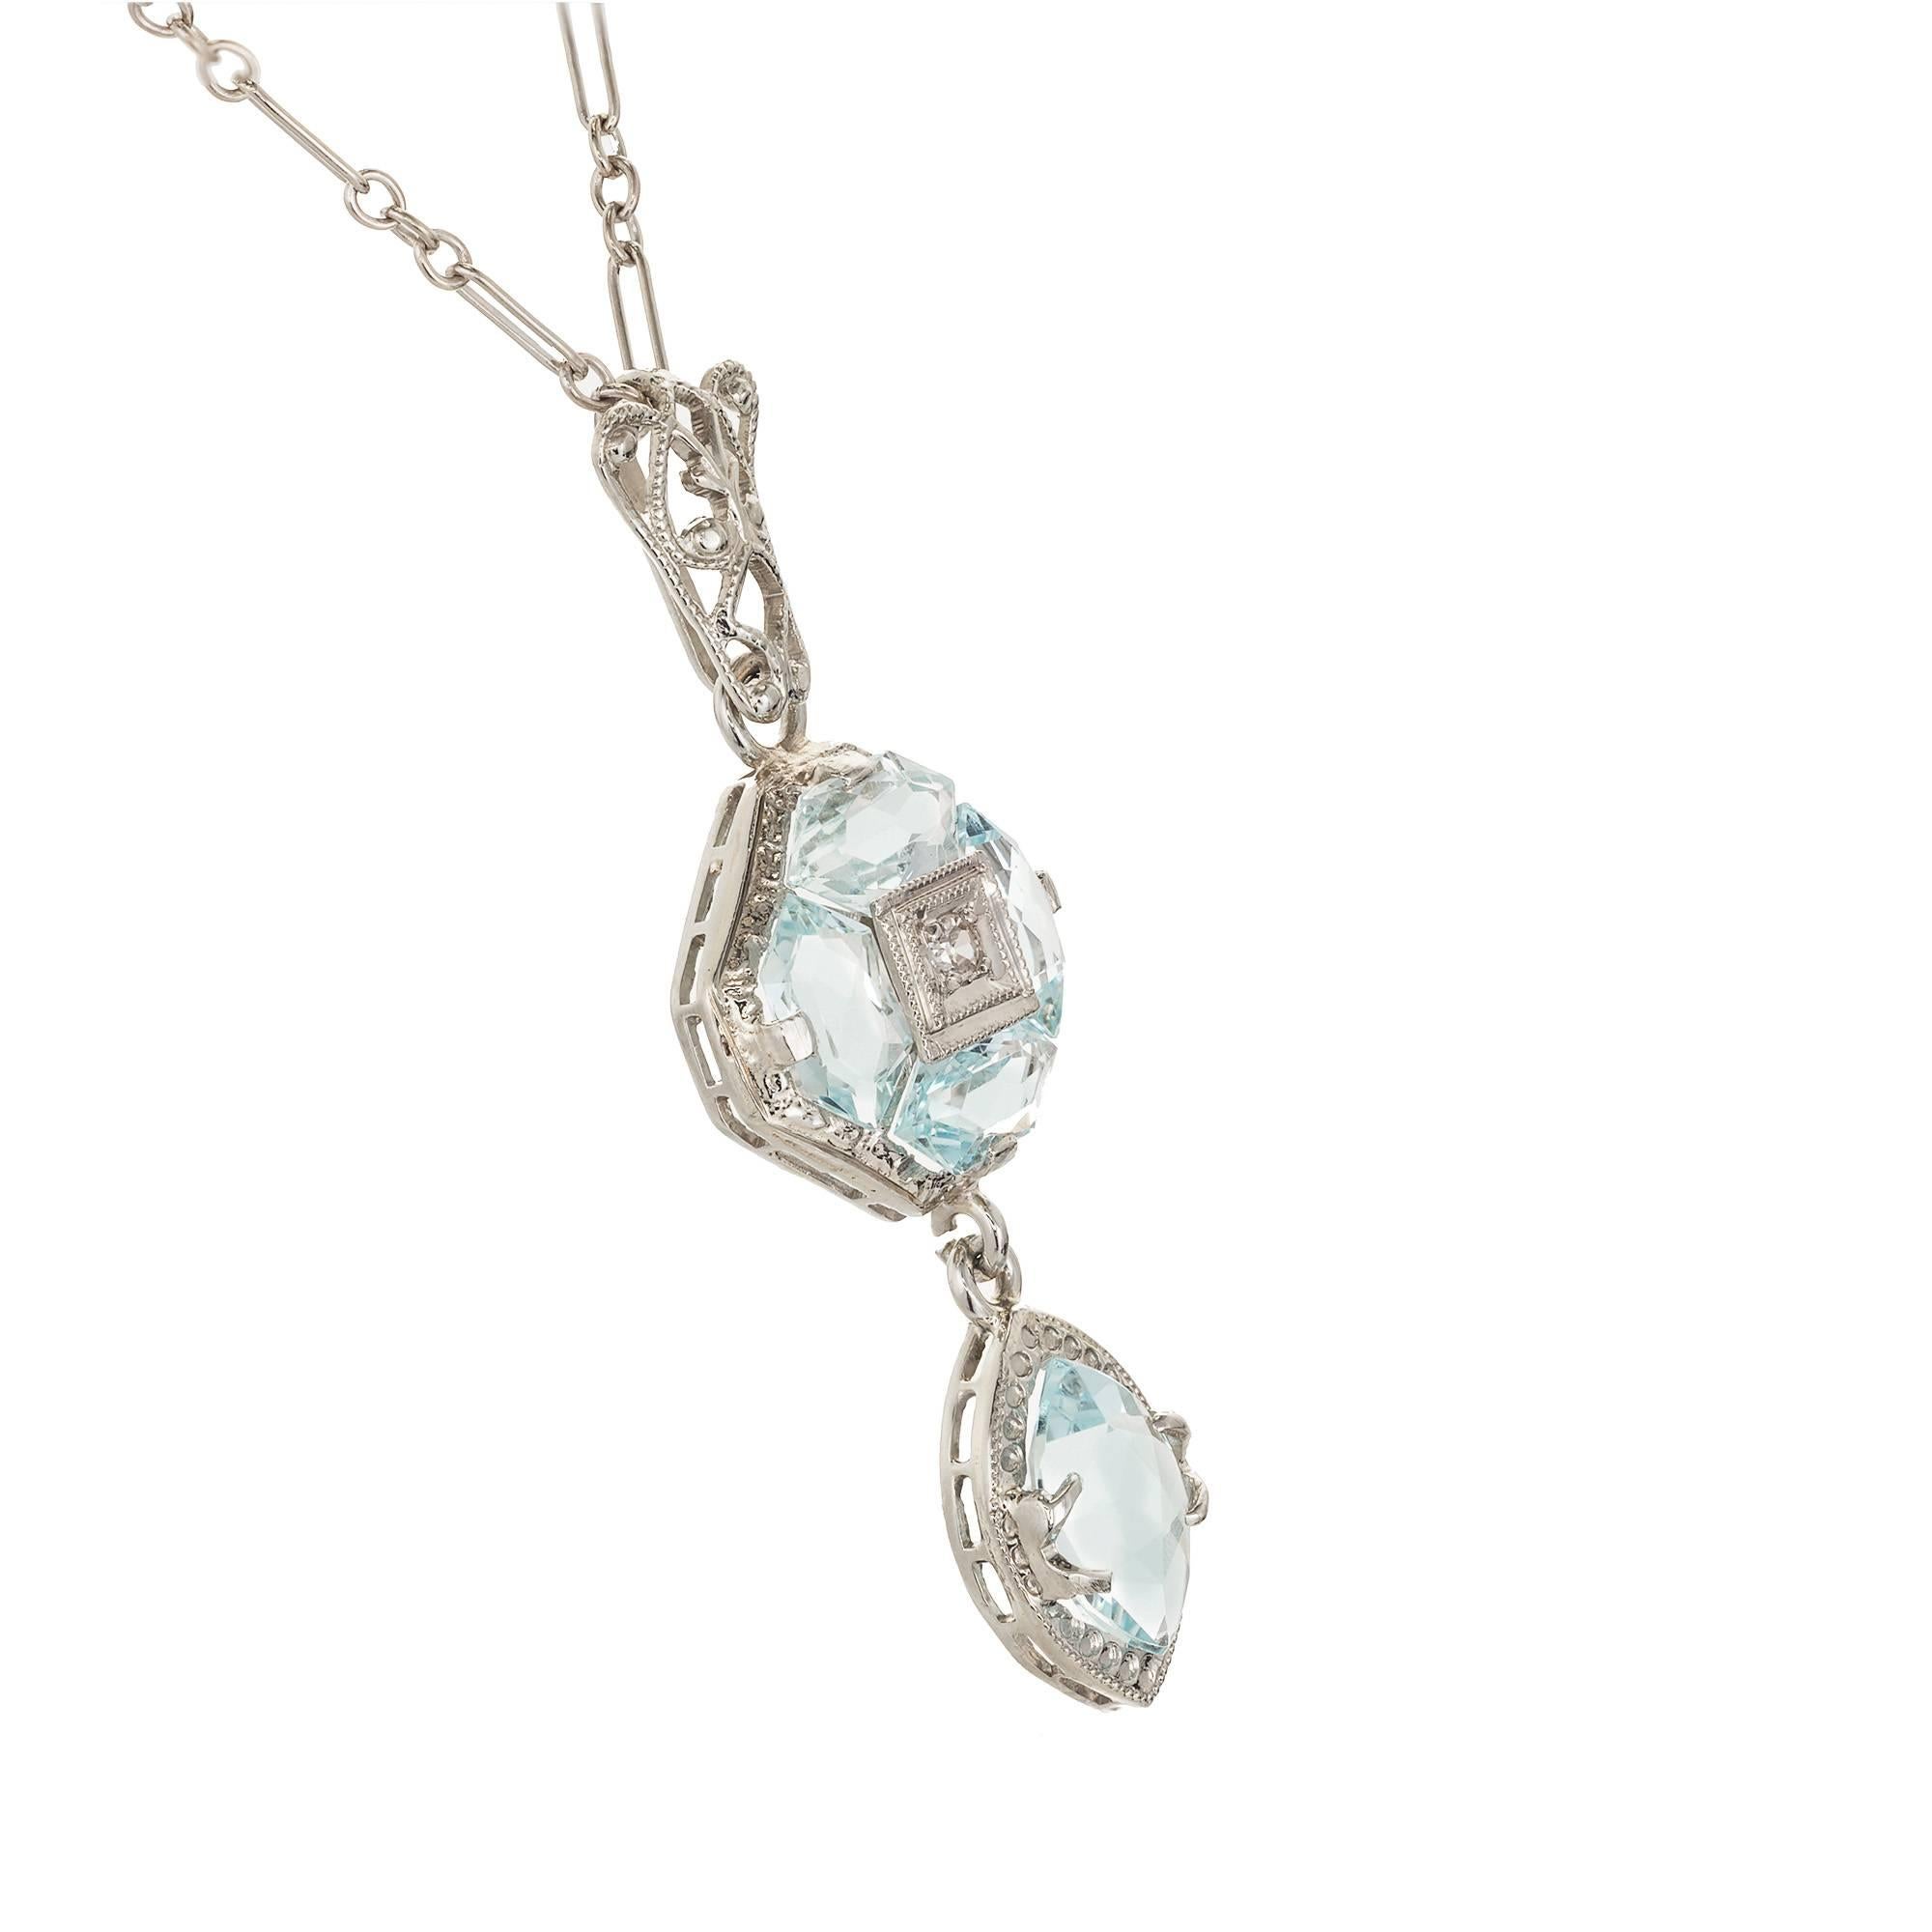 All original 1940s Art Deco genuine natural Aqua and diamond drop pendant necklace in 14k white gold with original chain. 

1 Marquise Aquamarine, approx. total weight .45cts
4 shield Aquamarines, approx. total weight 1.00cts
1 round diamond,